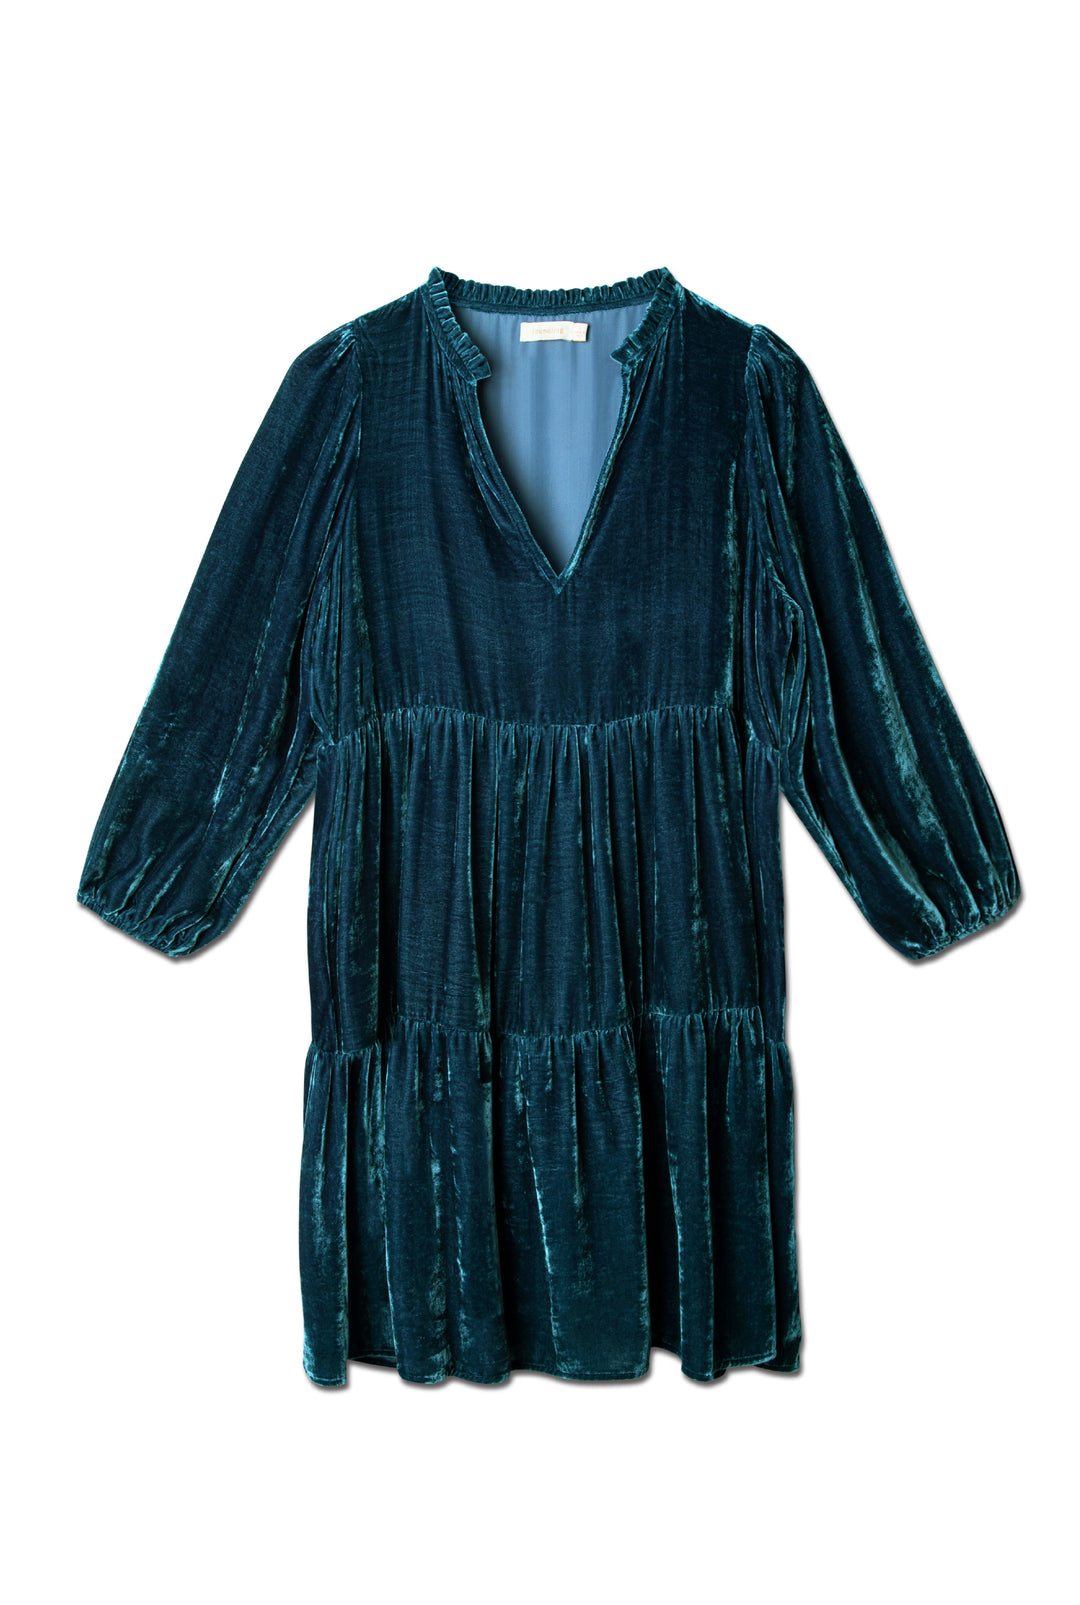 blue pure silk velvet knee length dress in tiers with blousey sleeve and little gathers to shoulder and neckline